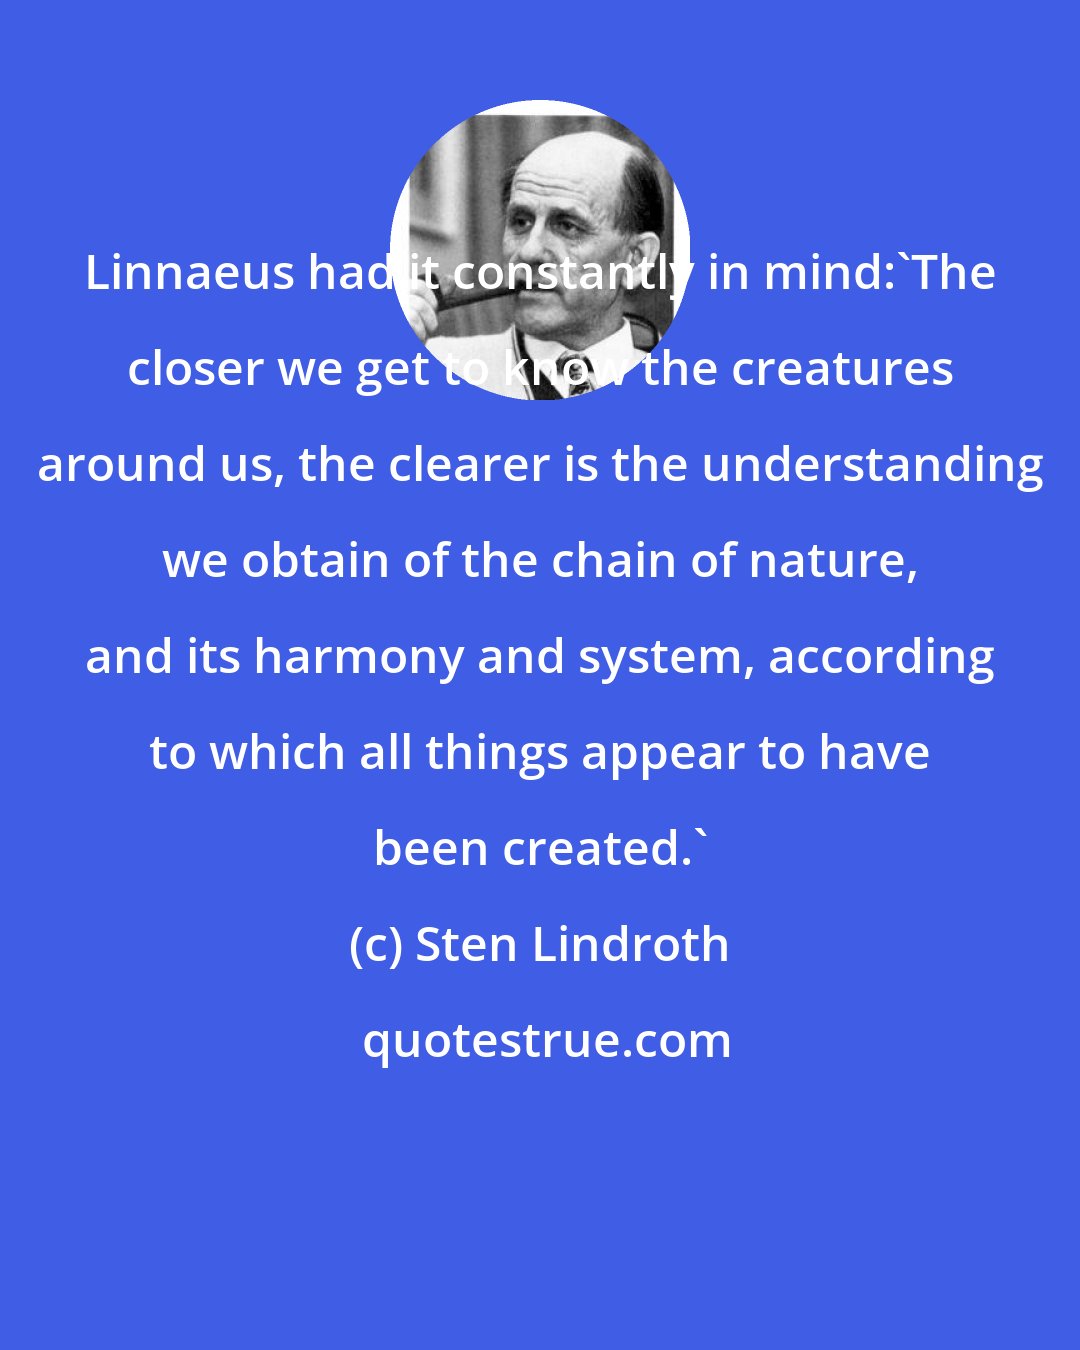 Sten Lindroth: Linnaeus had it constantly in mind:'The closer we get to know the creatures around us, the clearer is the understanding we obtain of the chain of nature, and its harmony and system, according to which all things appear to have been created.'